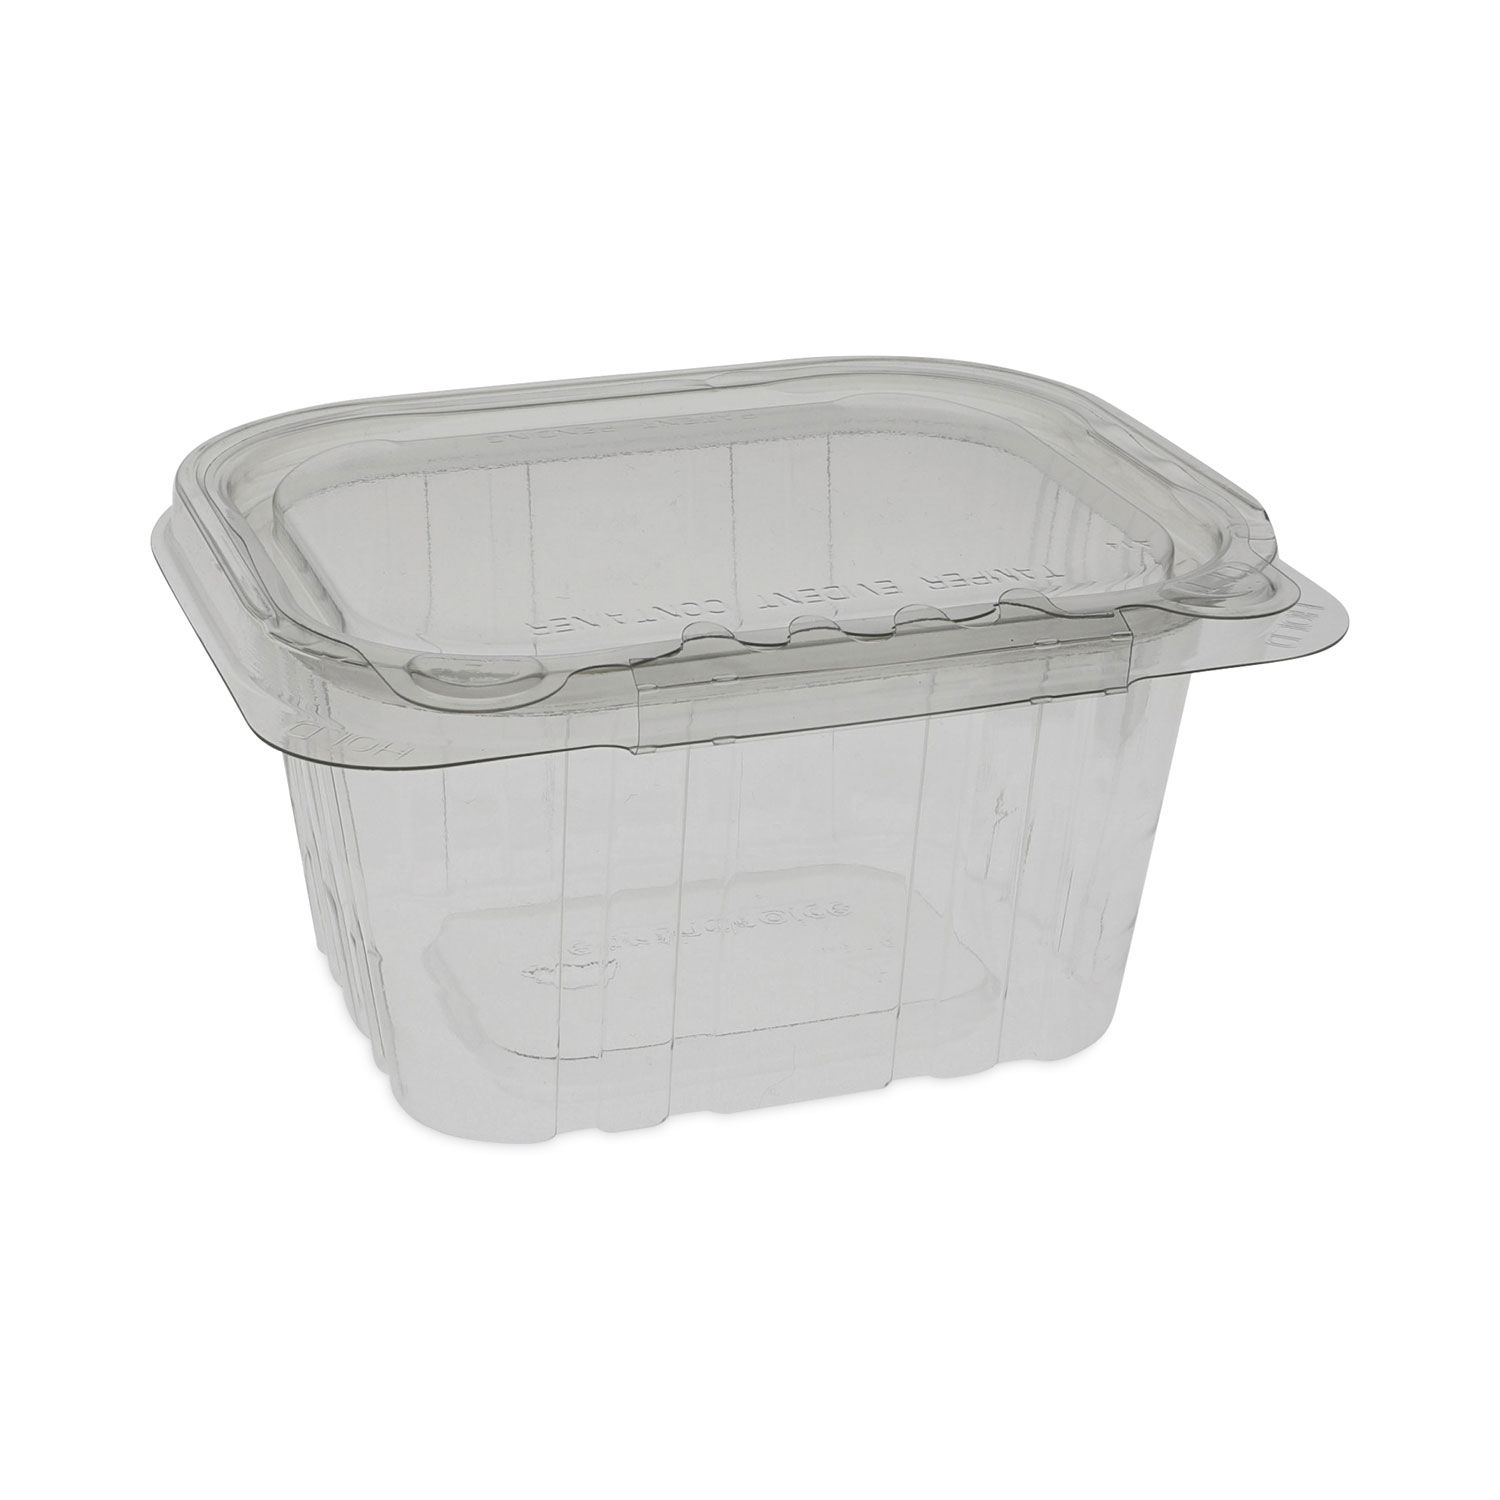 tamper-evidence Closure Takeaway Food Trays Disposable Bento Lunch